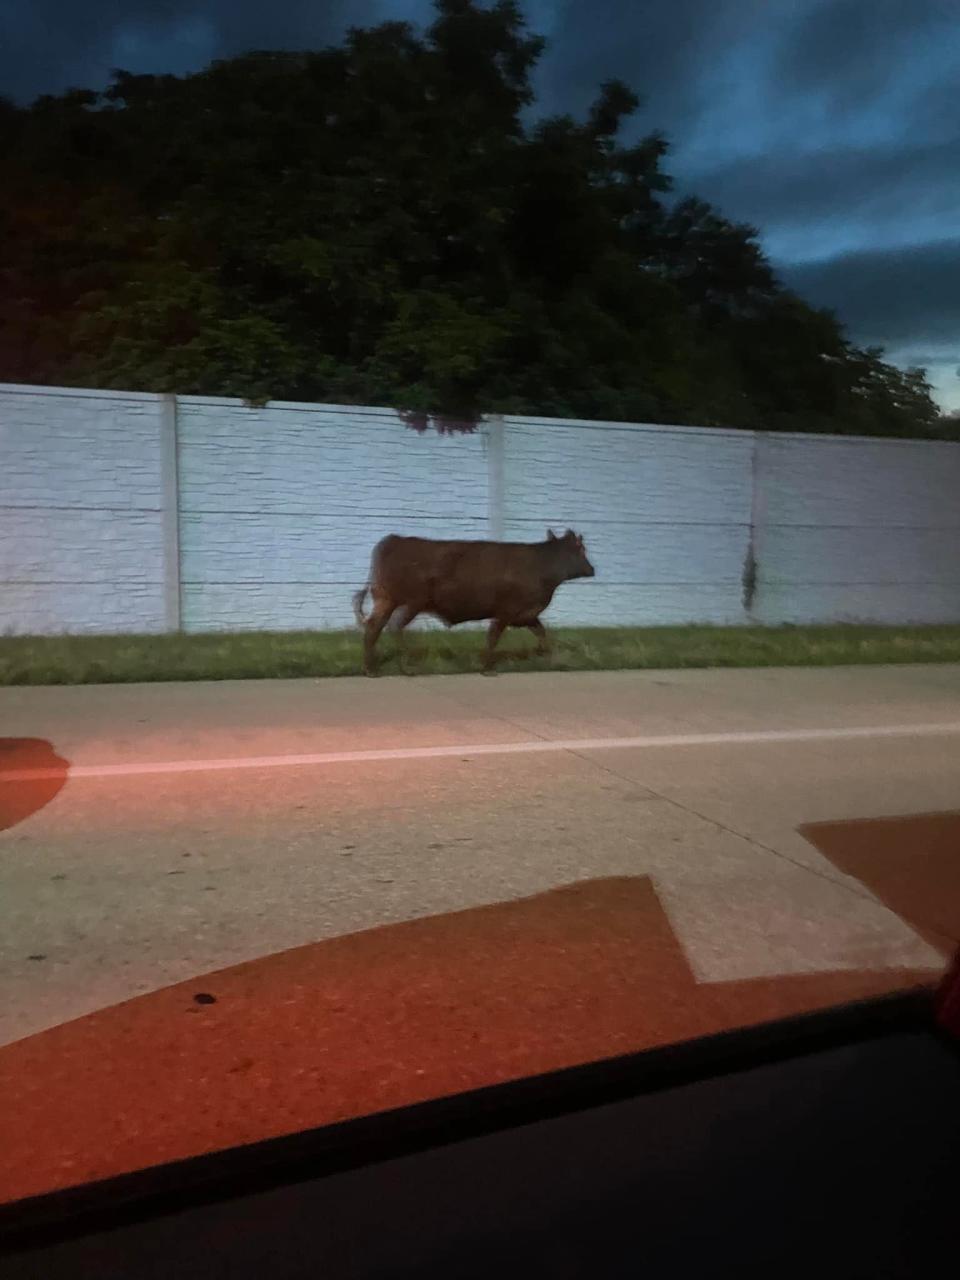 A Loose cow on I-270 after a trailer truck turned over. Police say they were successfully able to capture the cow. Photo submitted by Michael Cantor.